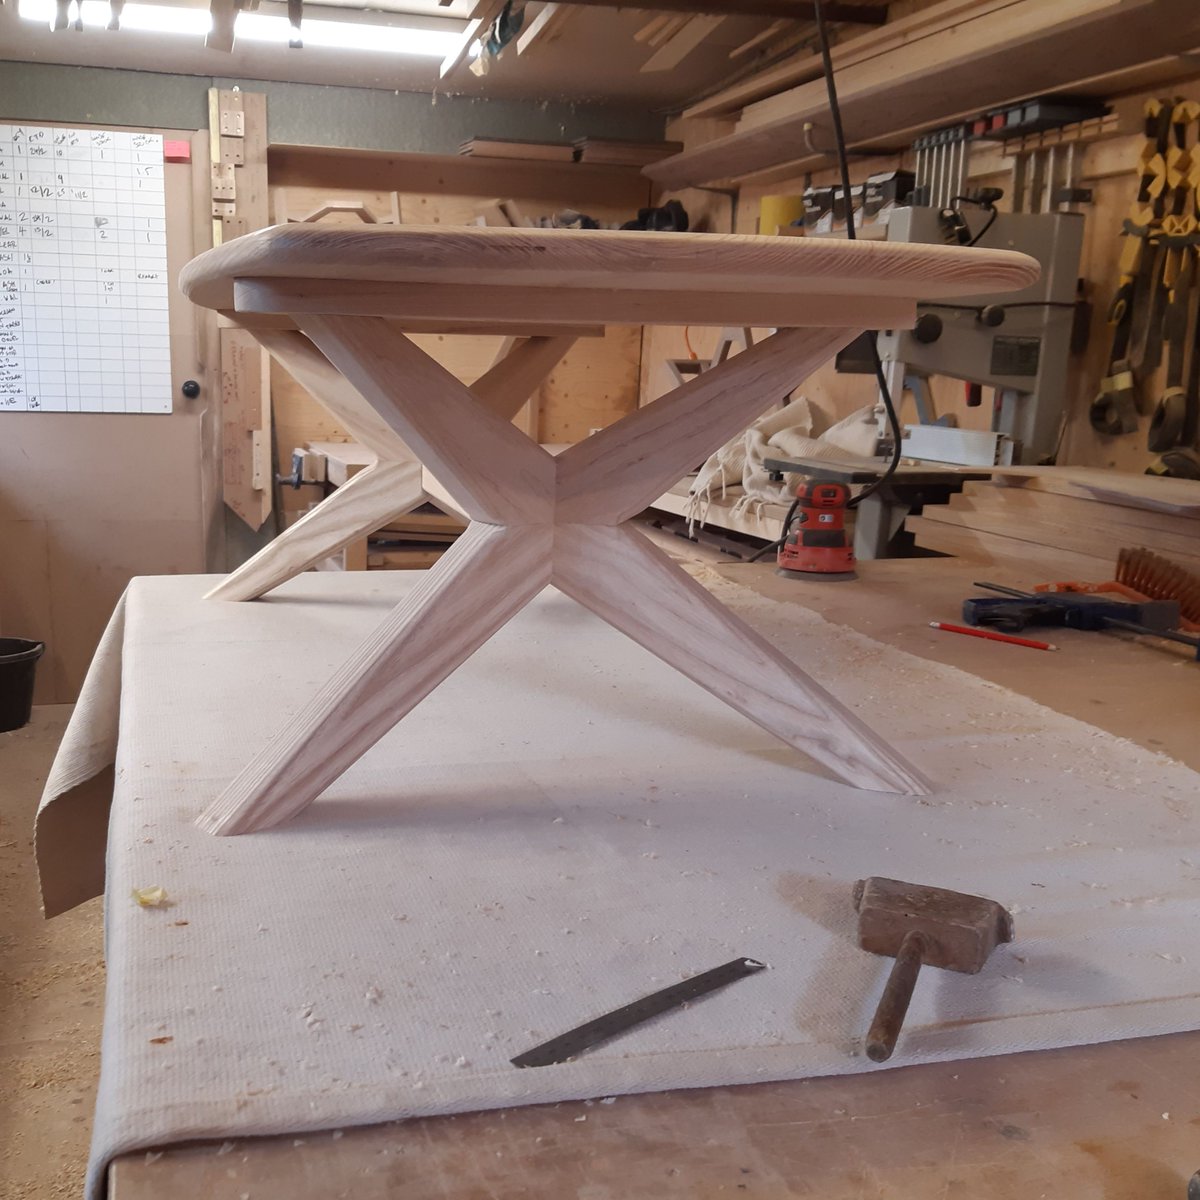 WORK IN PROGRESS
A Chantry coffee table almost over the finish line... buff.ly/2qkXTtP #charliecaffynfurniture #modernbritishfurniture #craftsmanship #coffeetable #furnituredesignermaker #bespokecoffeetable #woodwork_feature